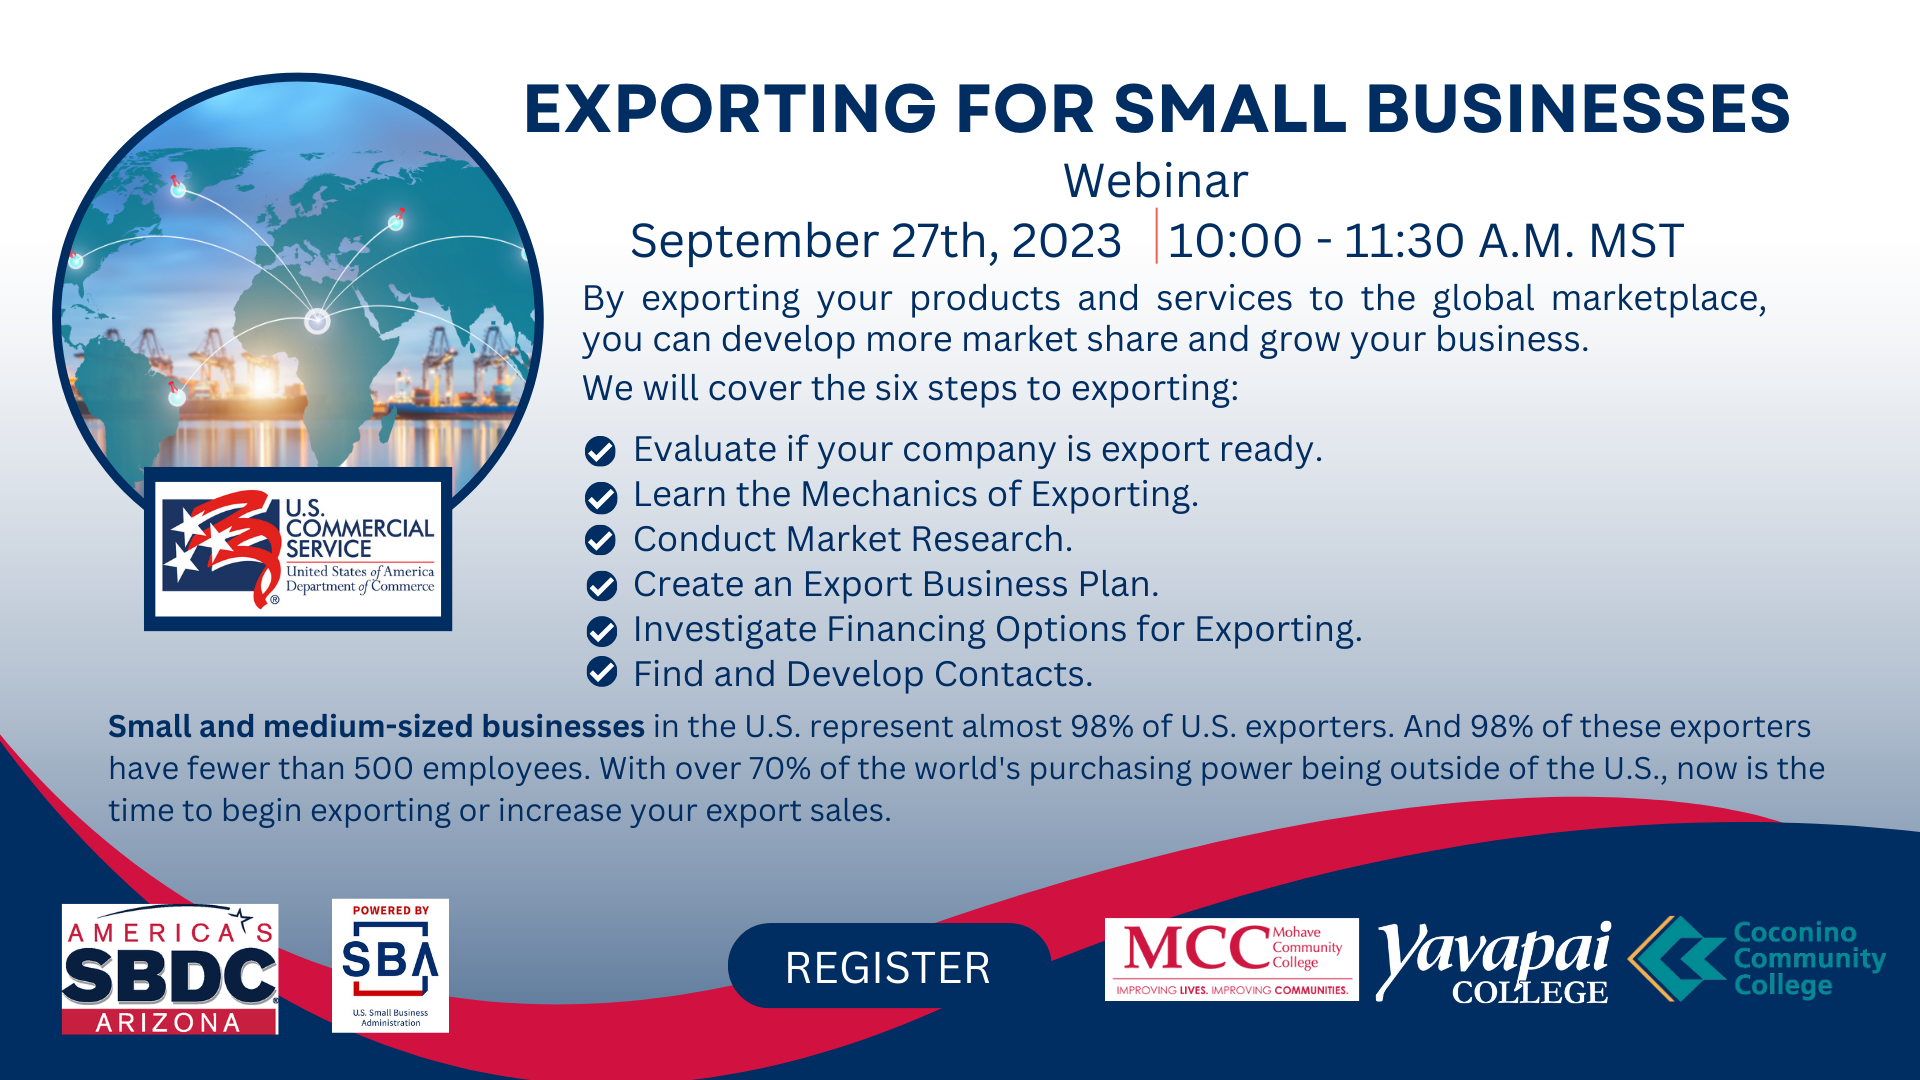 Exporting for Small Business - Webinar